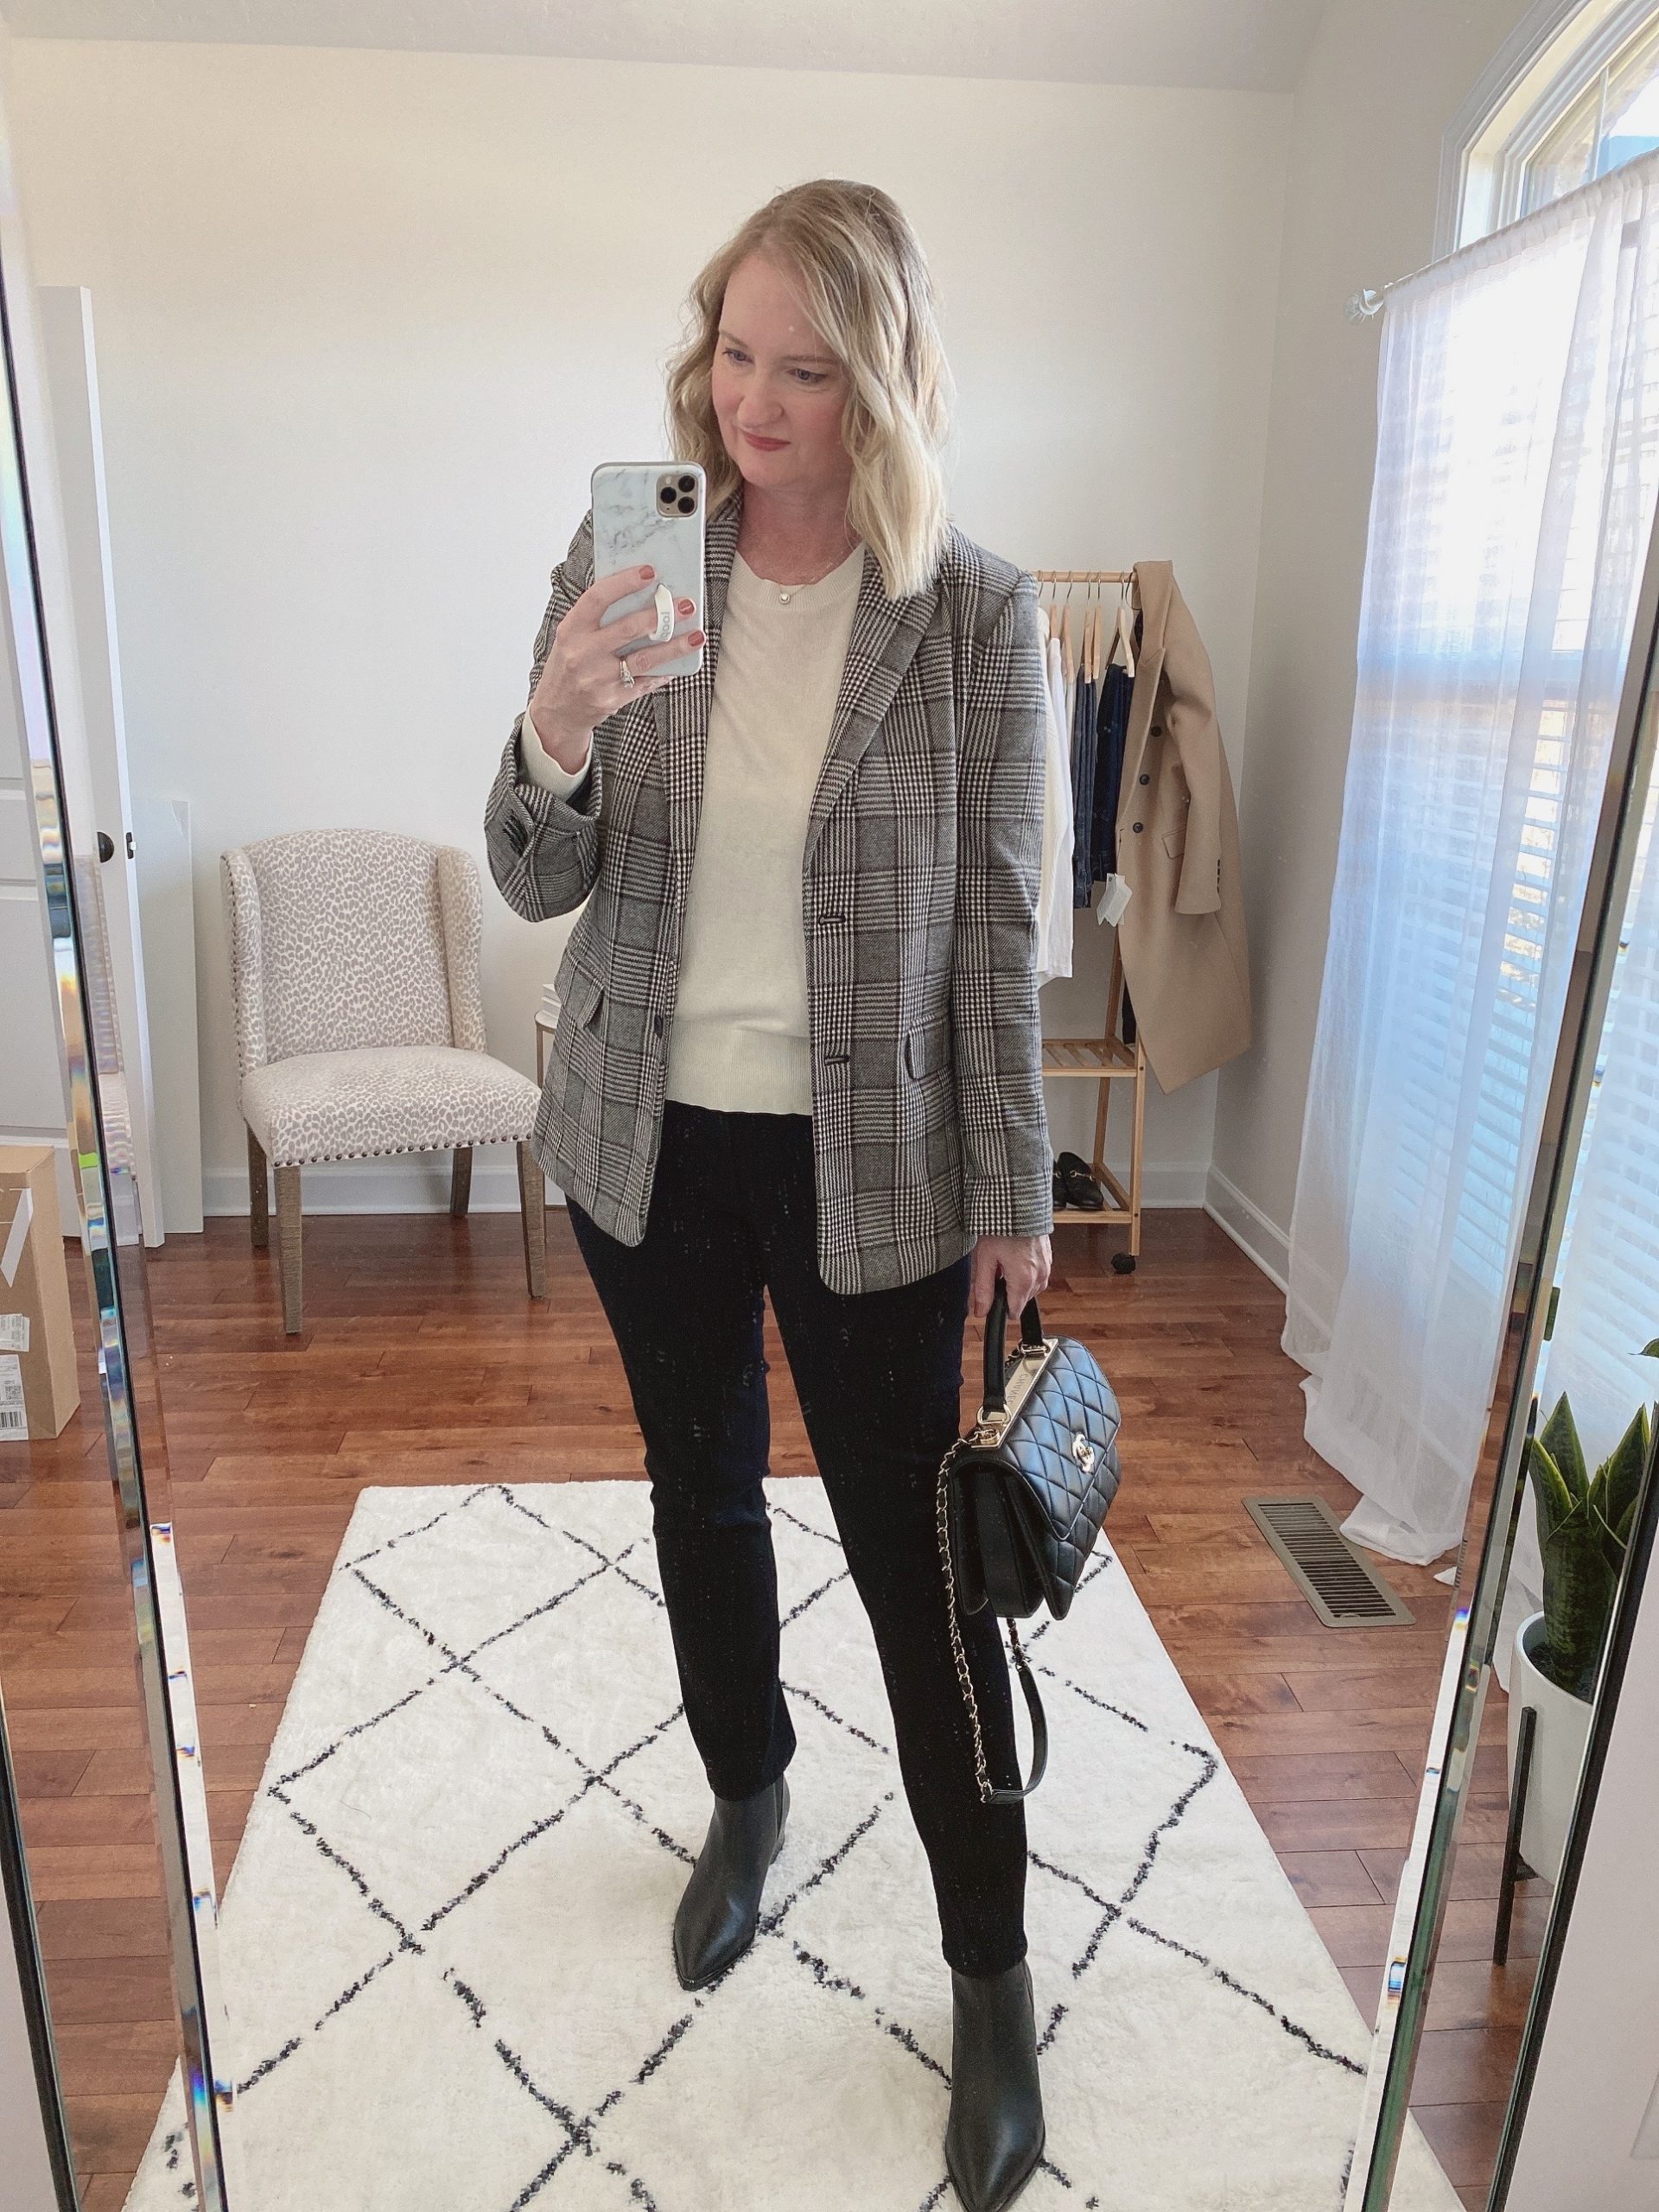 Instagram Outfits Diary: November & December 2021 - Classy Yet Trendy